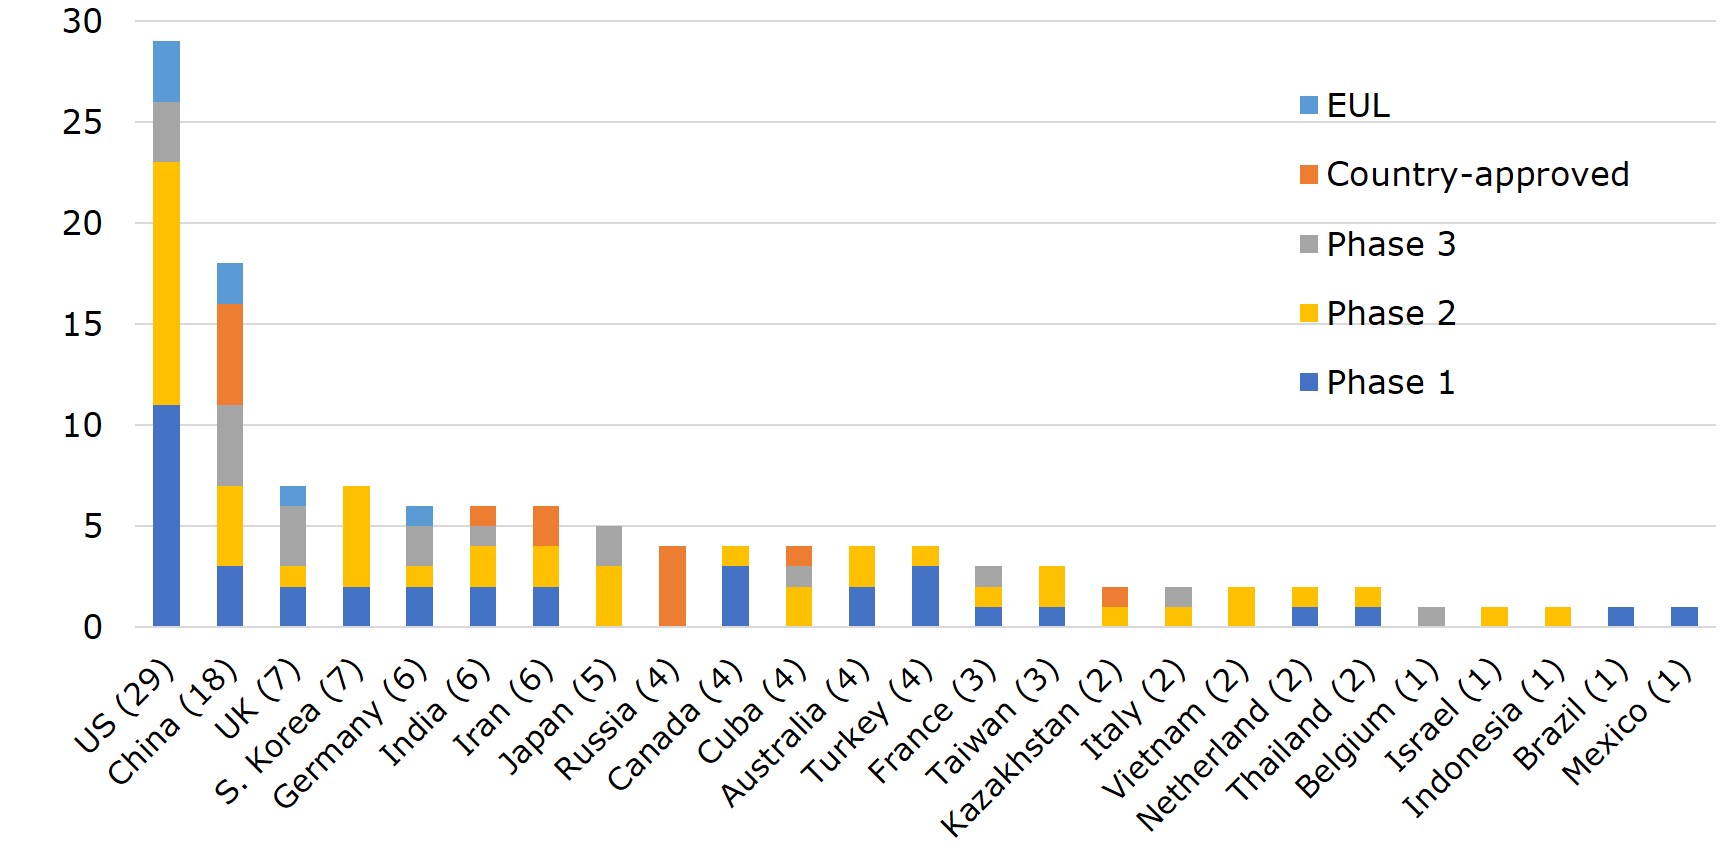 Number and Development Stage of Vaccines in Clinical Trial across 25 Countries